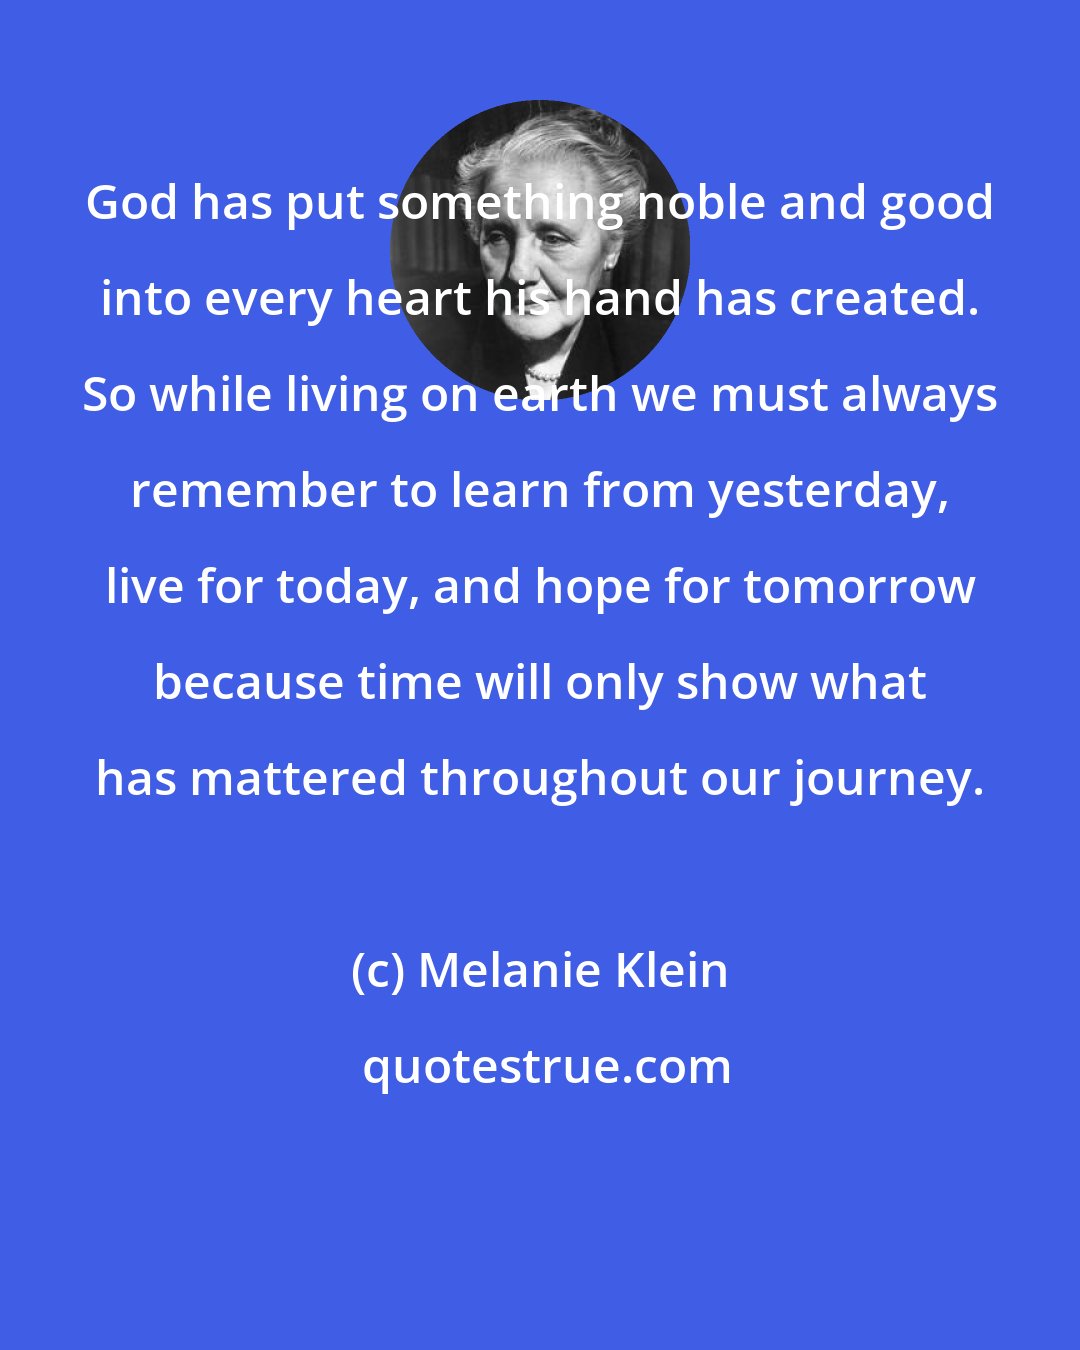 Melanie Klein: God has put something noble and good into every heart his hand has created. So while living on earth we must always remember to learn from yesterday, live for today, and hope for tomorrow because time will only show what has mattered throughout our journey.